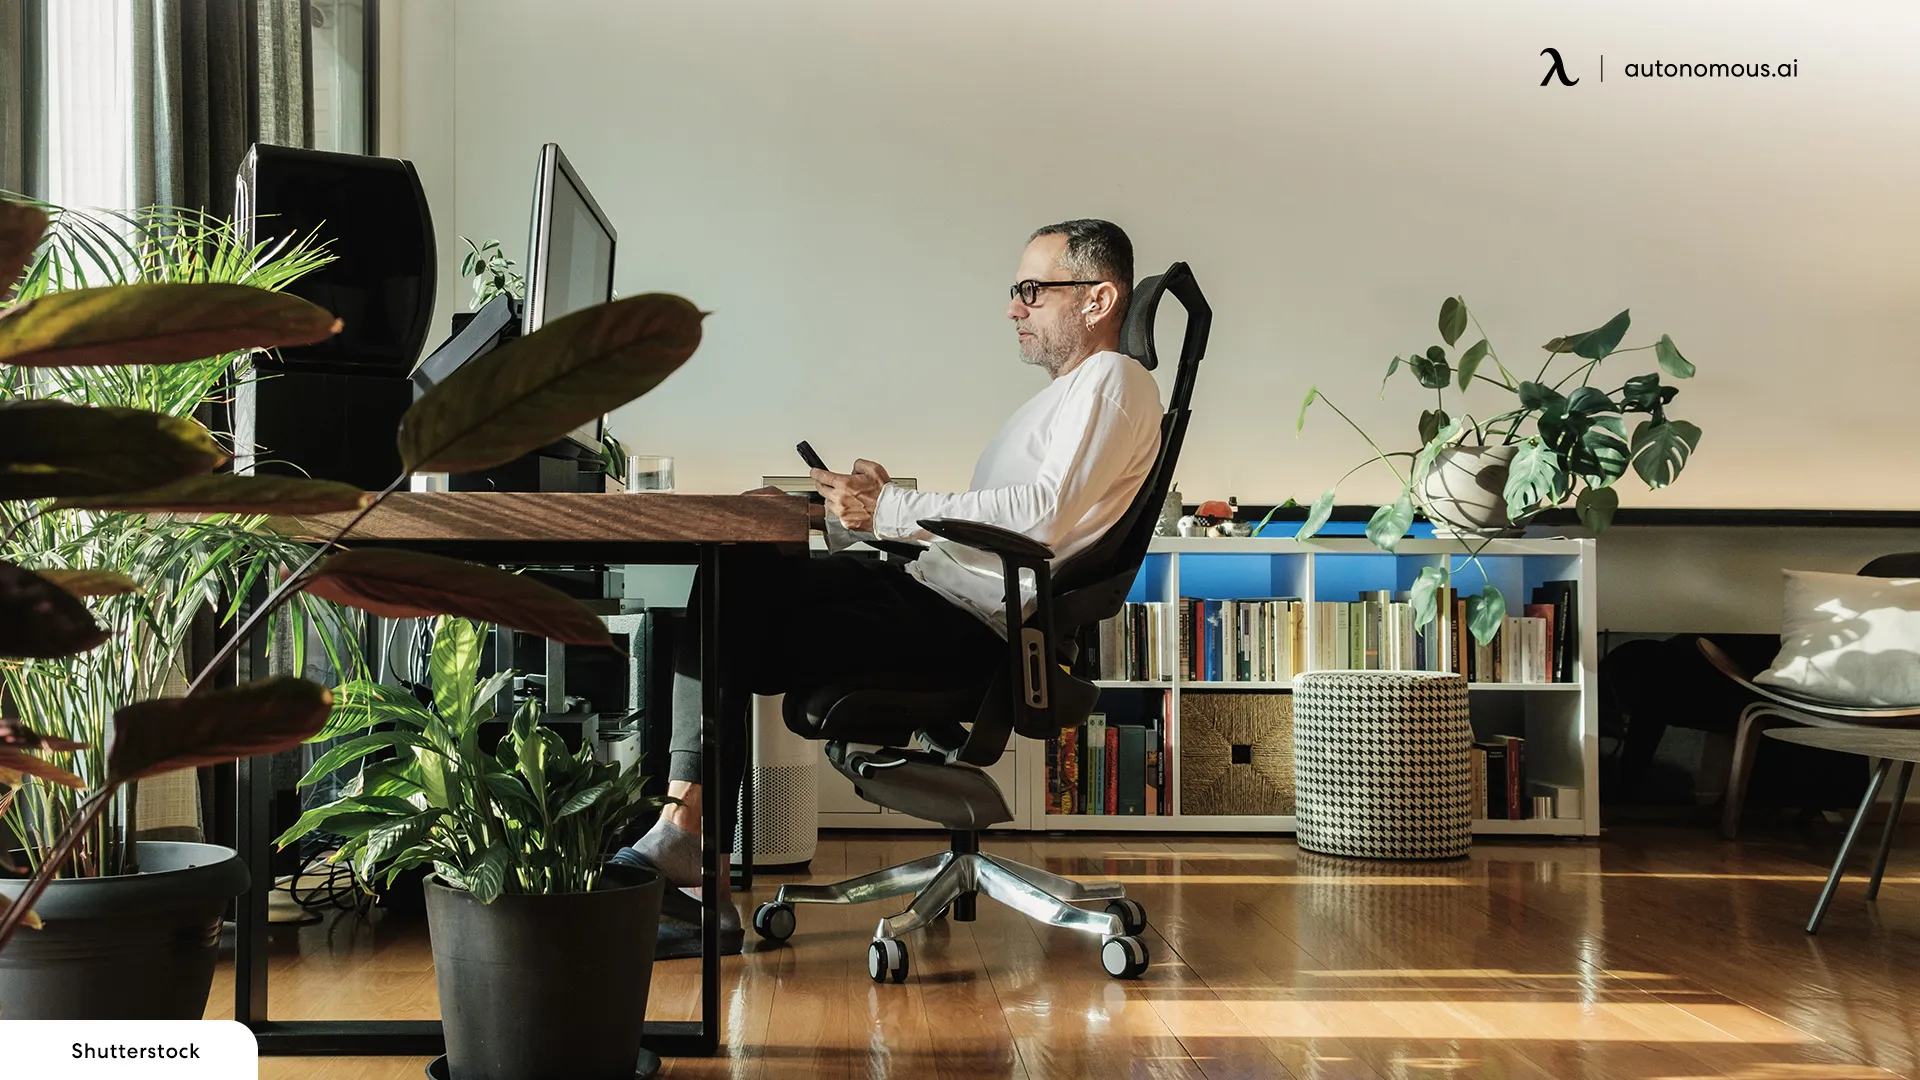 Benefits of Buying an Ergonomic Office Chair for At-Home Use